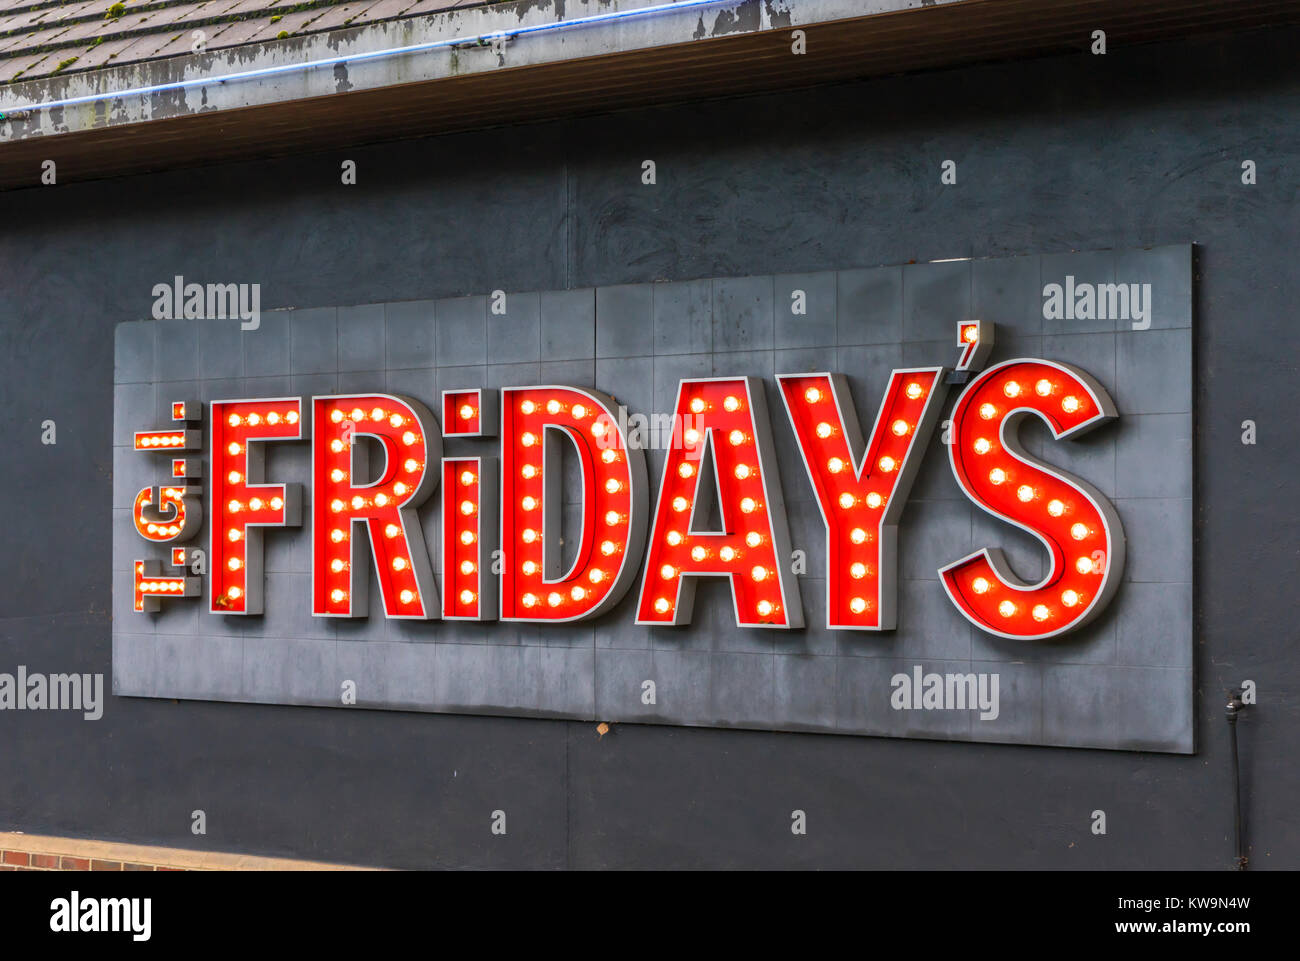 TGI Fridays restaurant chain illuminated logo/ sign in red letters outside a restaurant in the UK, January 2018 Stock Photo